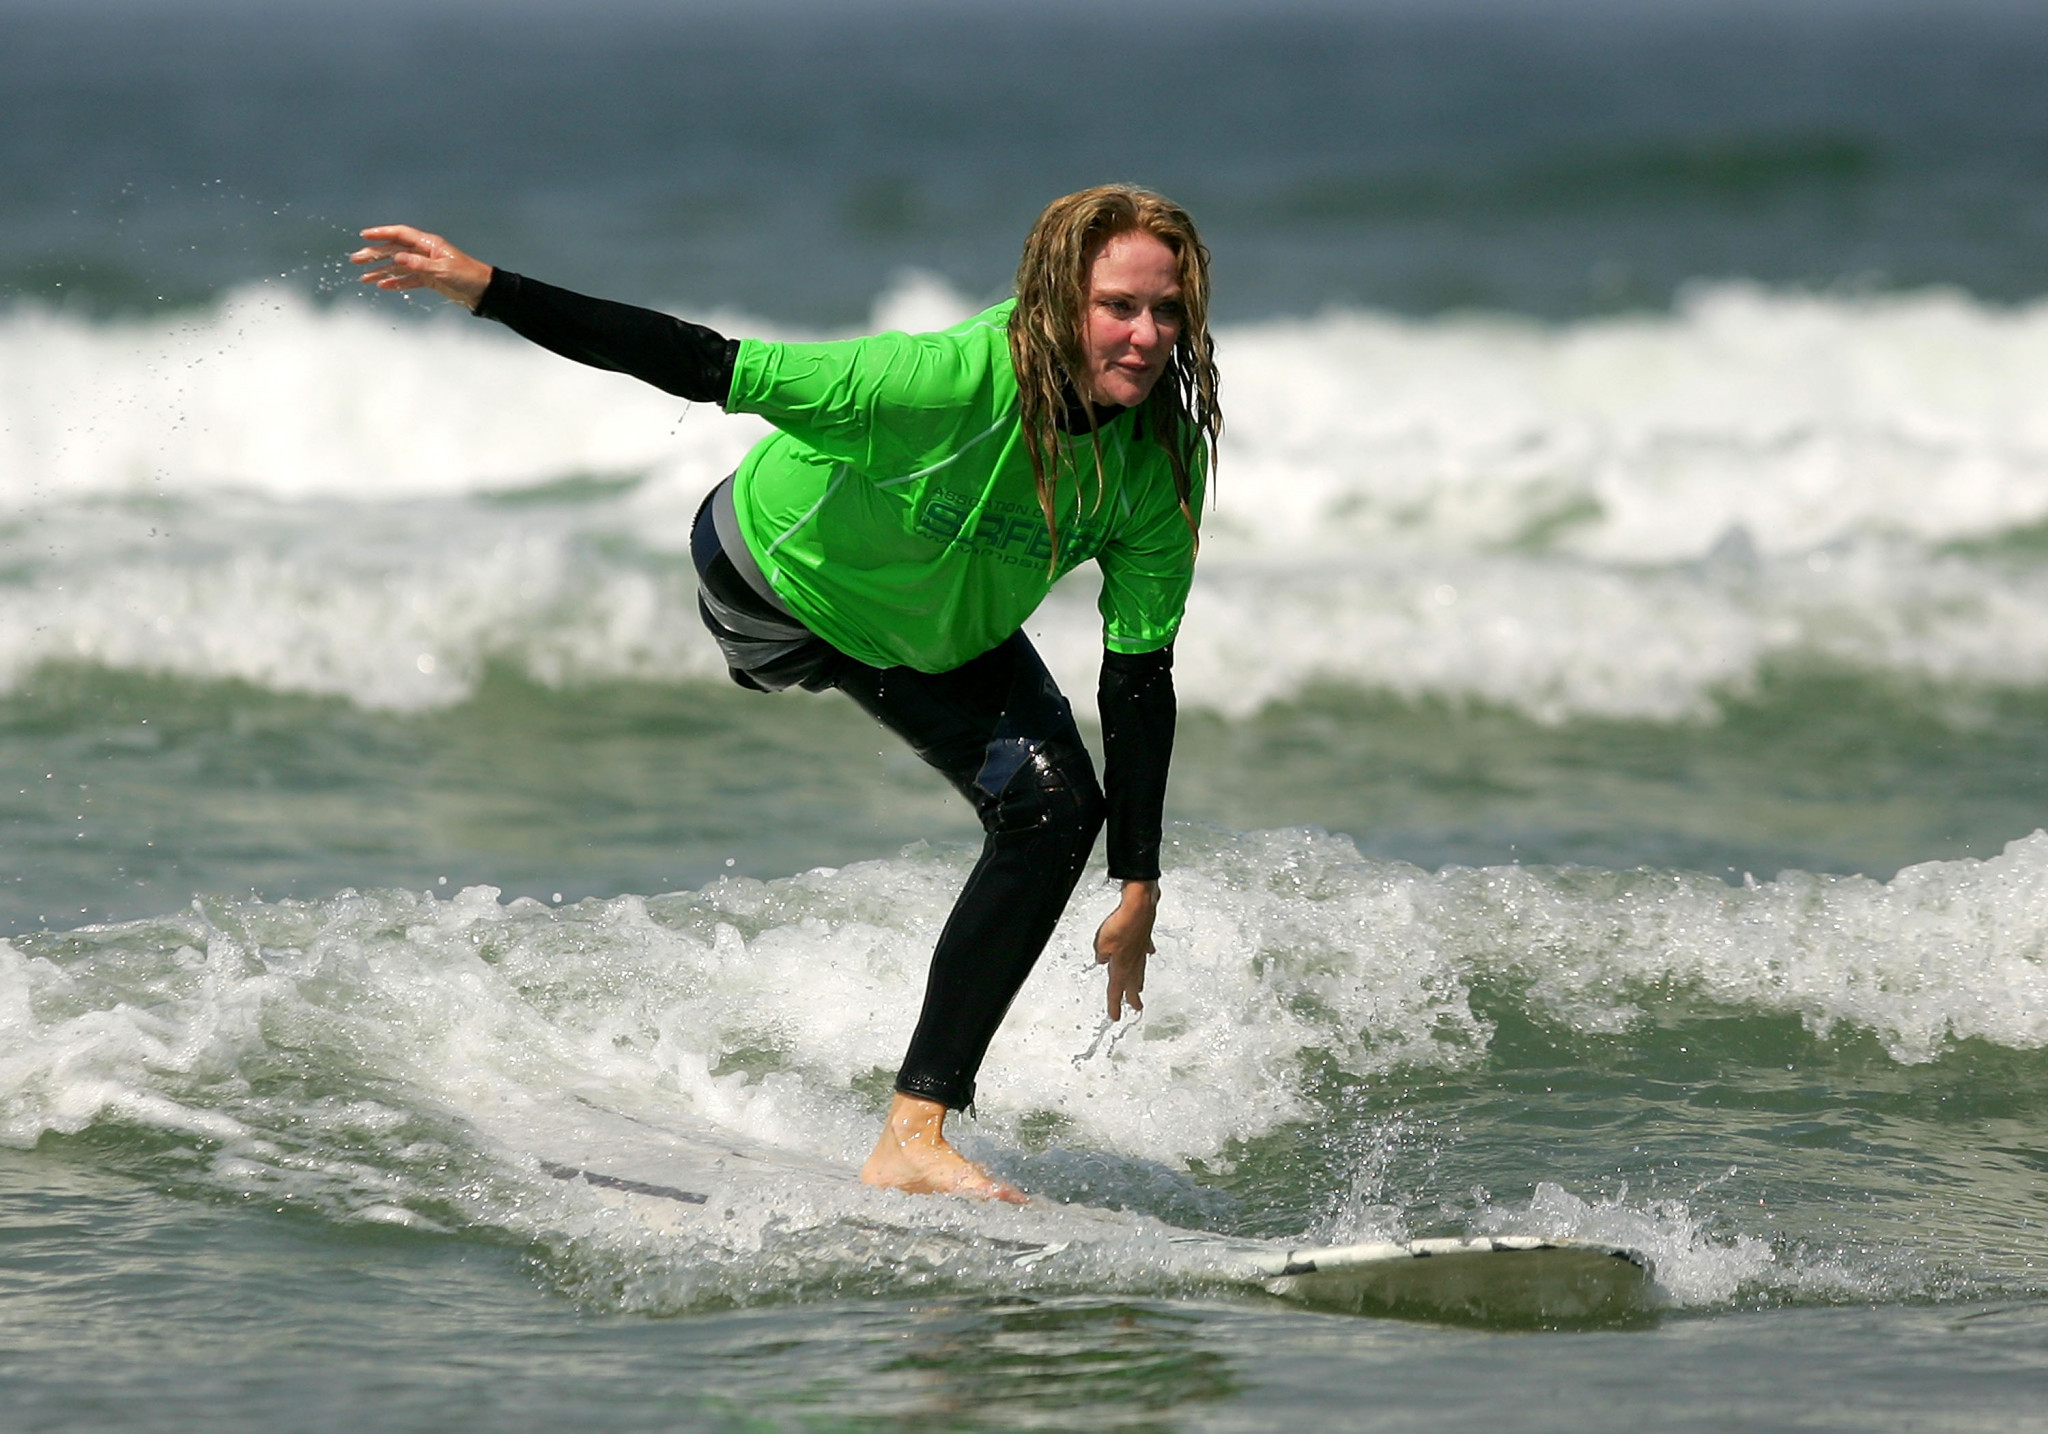 The International Surfing Association are aiming for Paralympic inclusion ©Getty Images